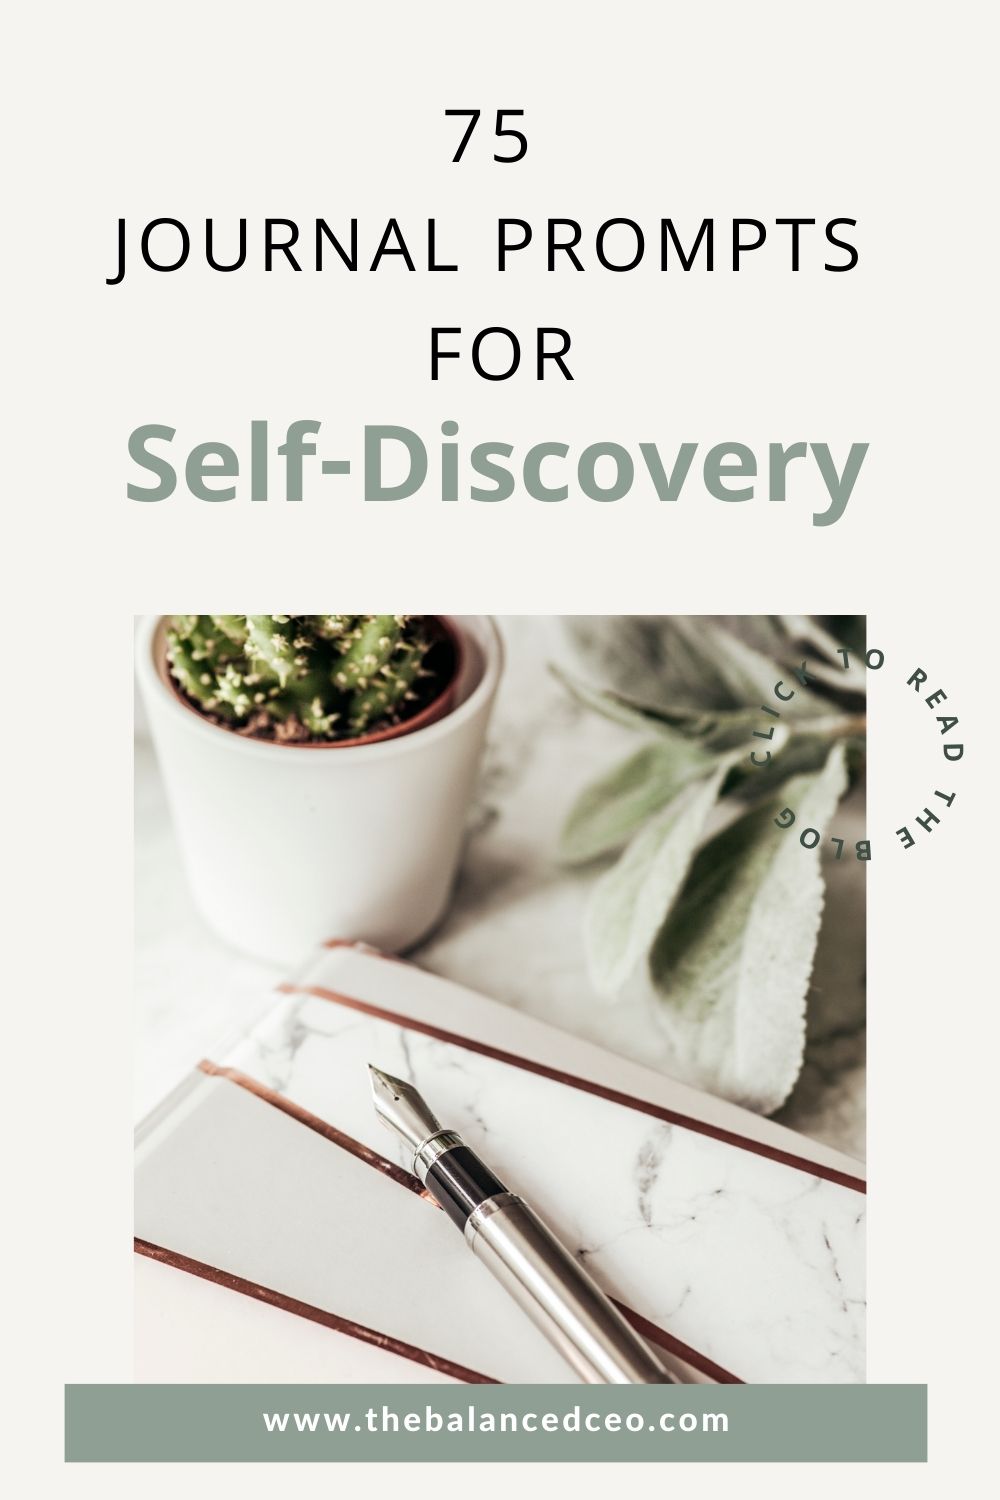 75 Journal Prompts for Self-Discovery